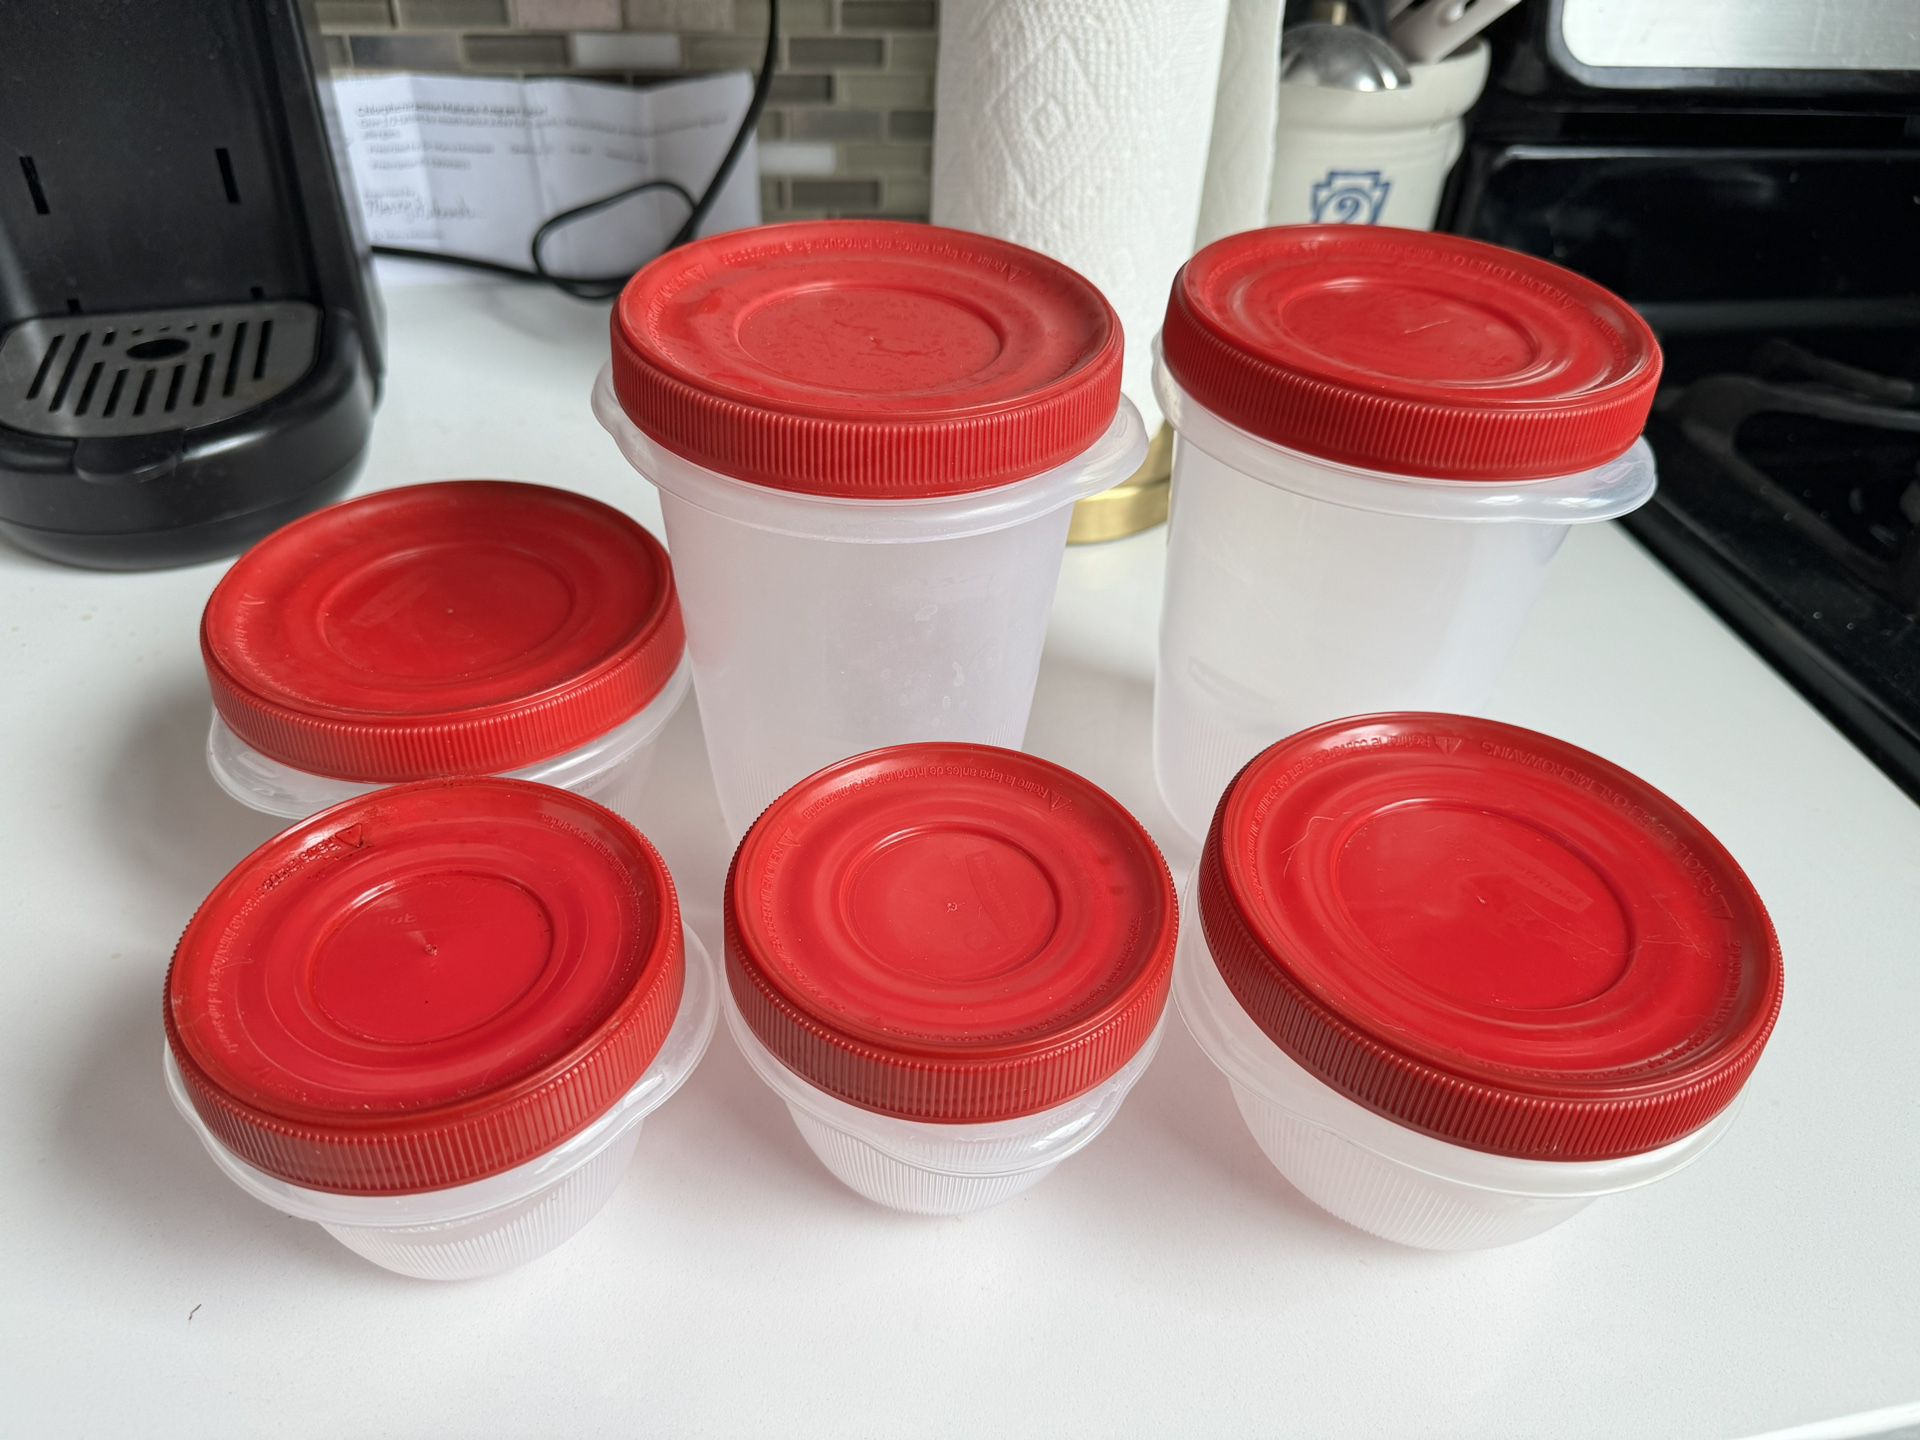 Rubbermaid Storage Containers (Set of 6) 